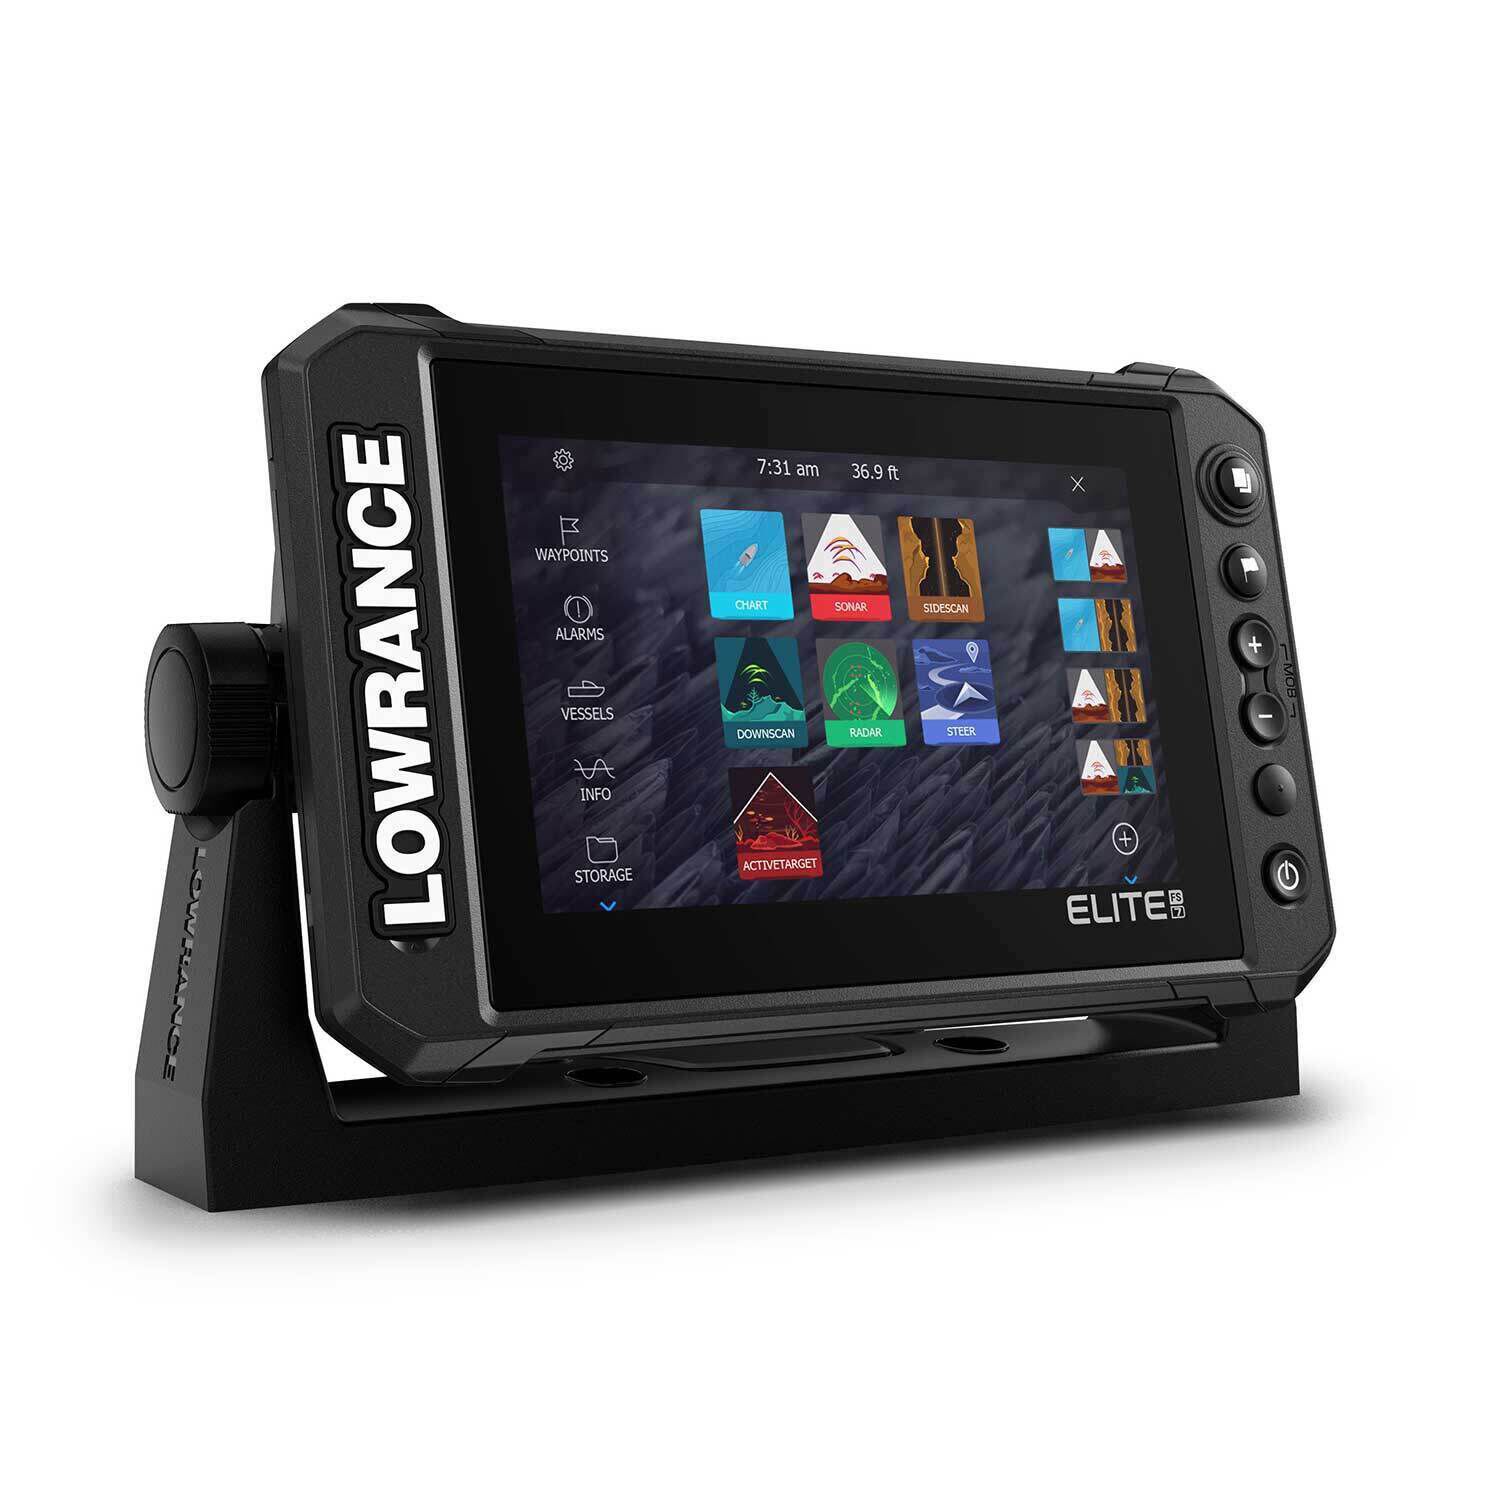 Elite FS 7 Fishfinder/Chartplotter Combo with HDI Transducer and C